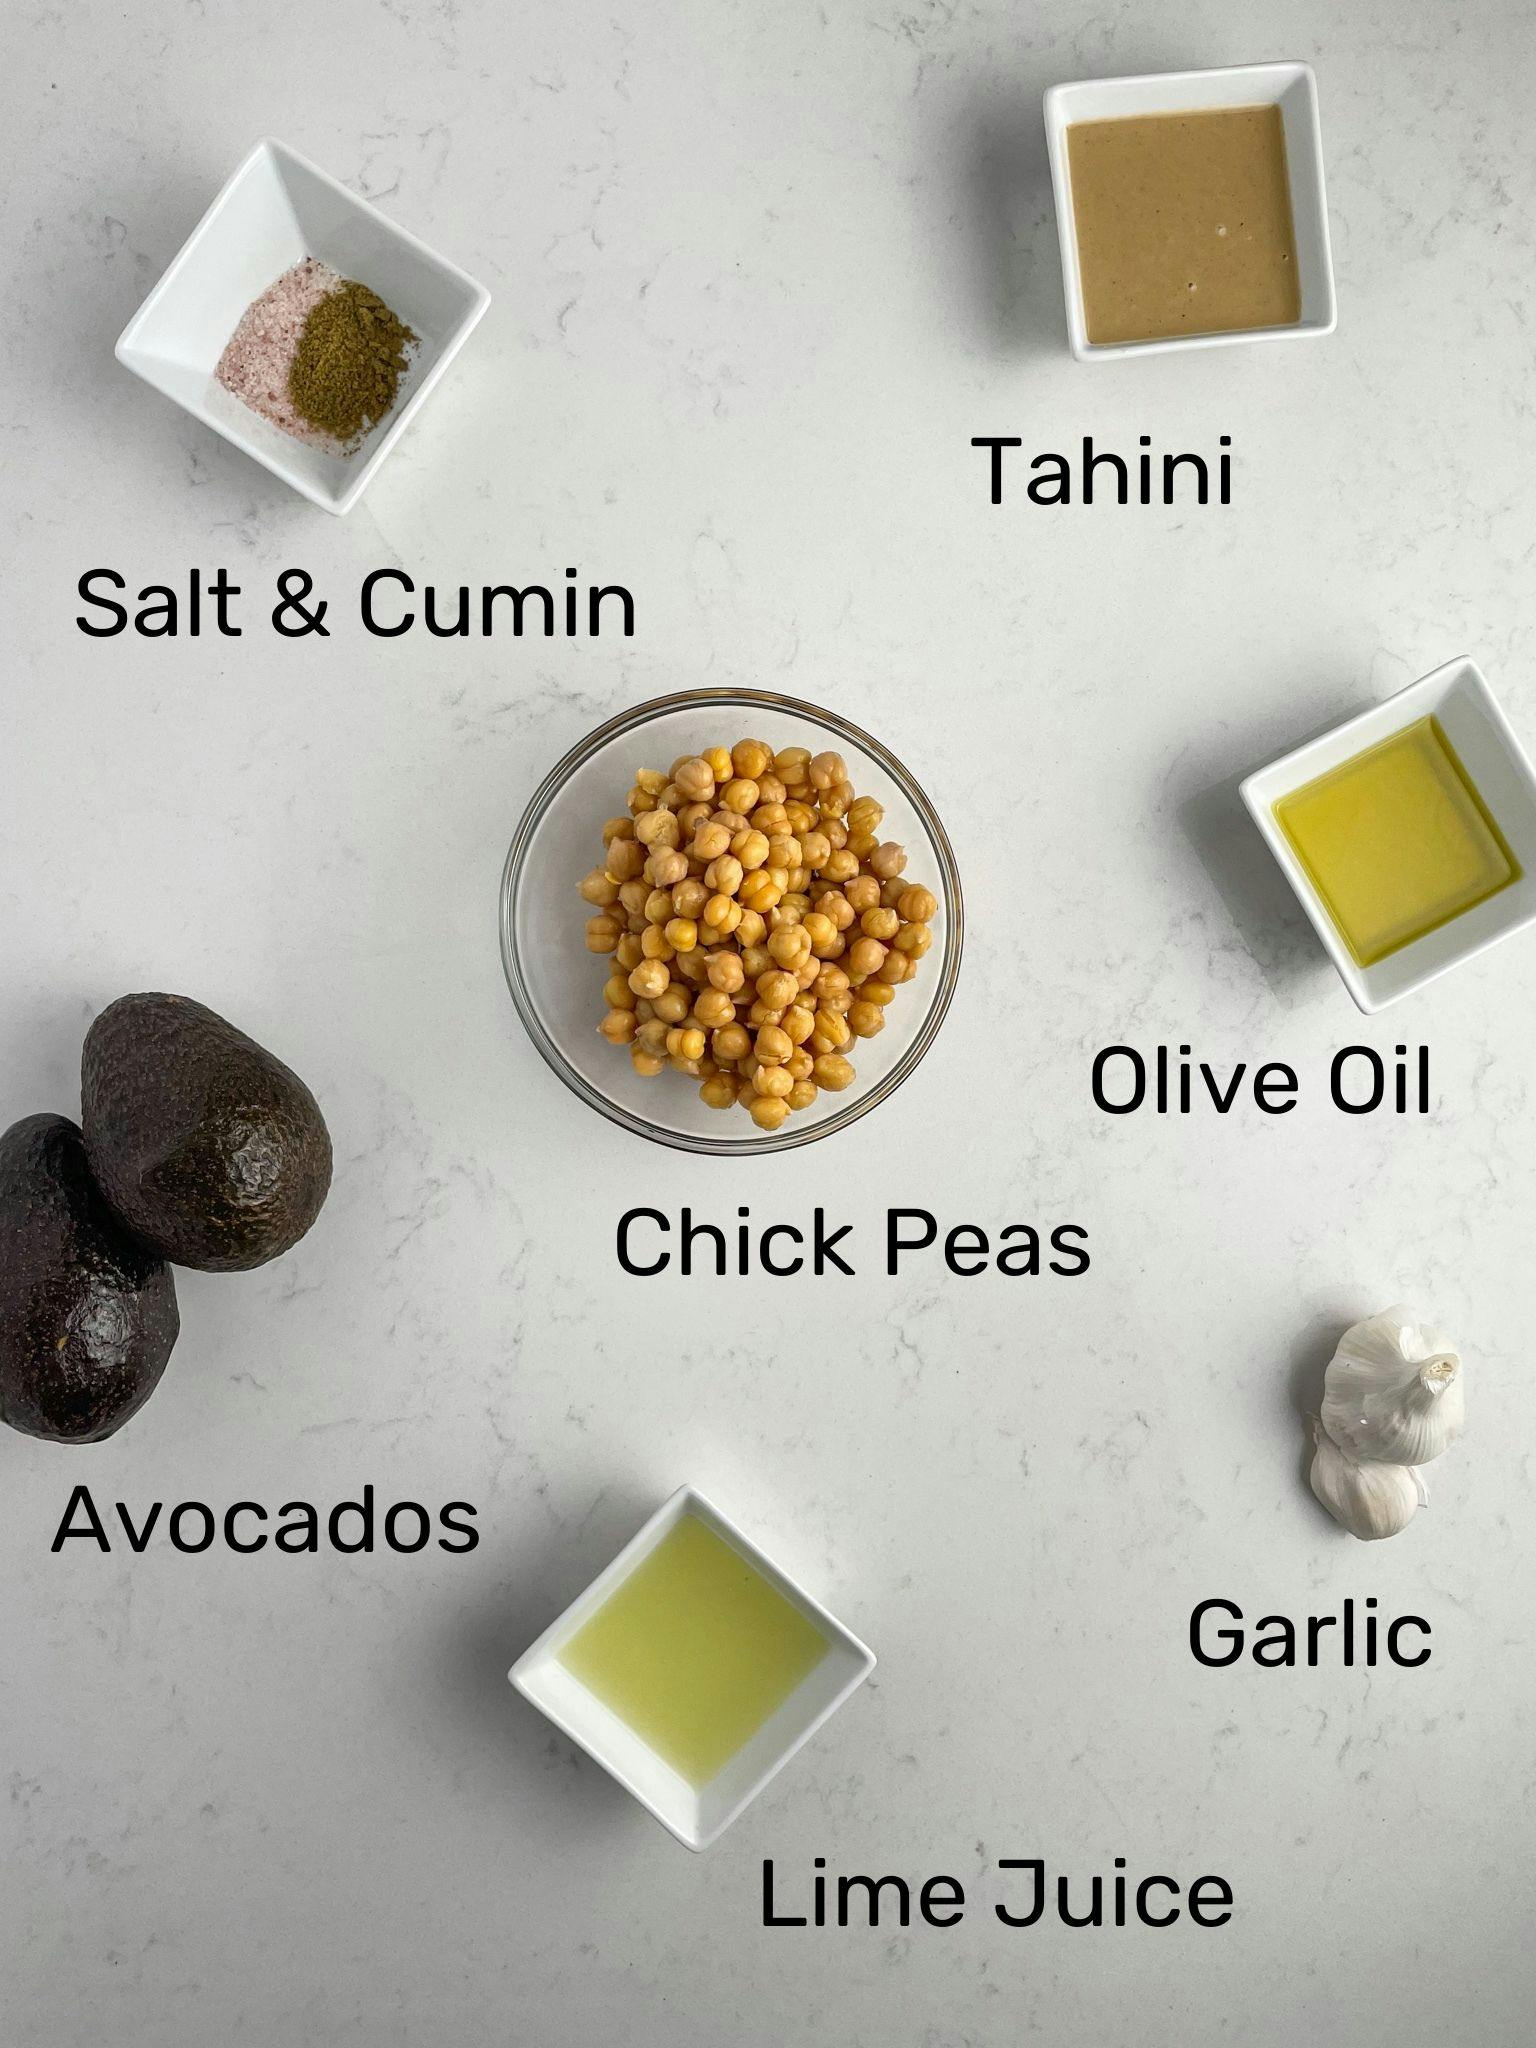 The ingredients of the avocado hummus laid out on a white table.